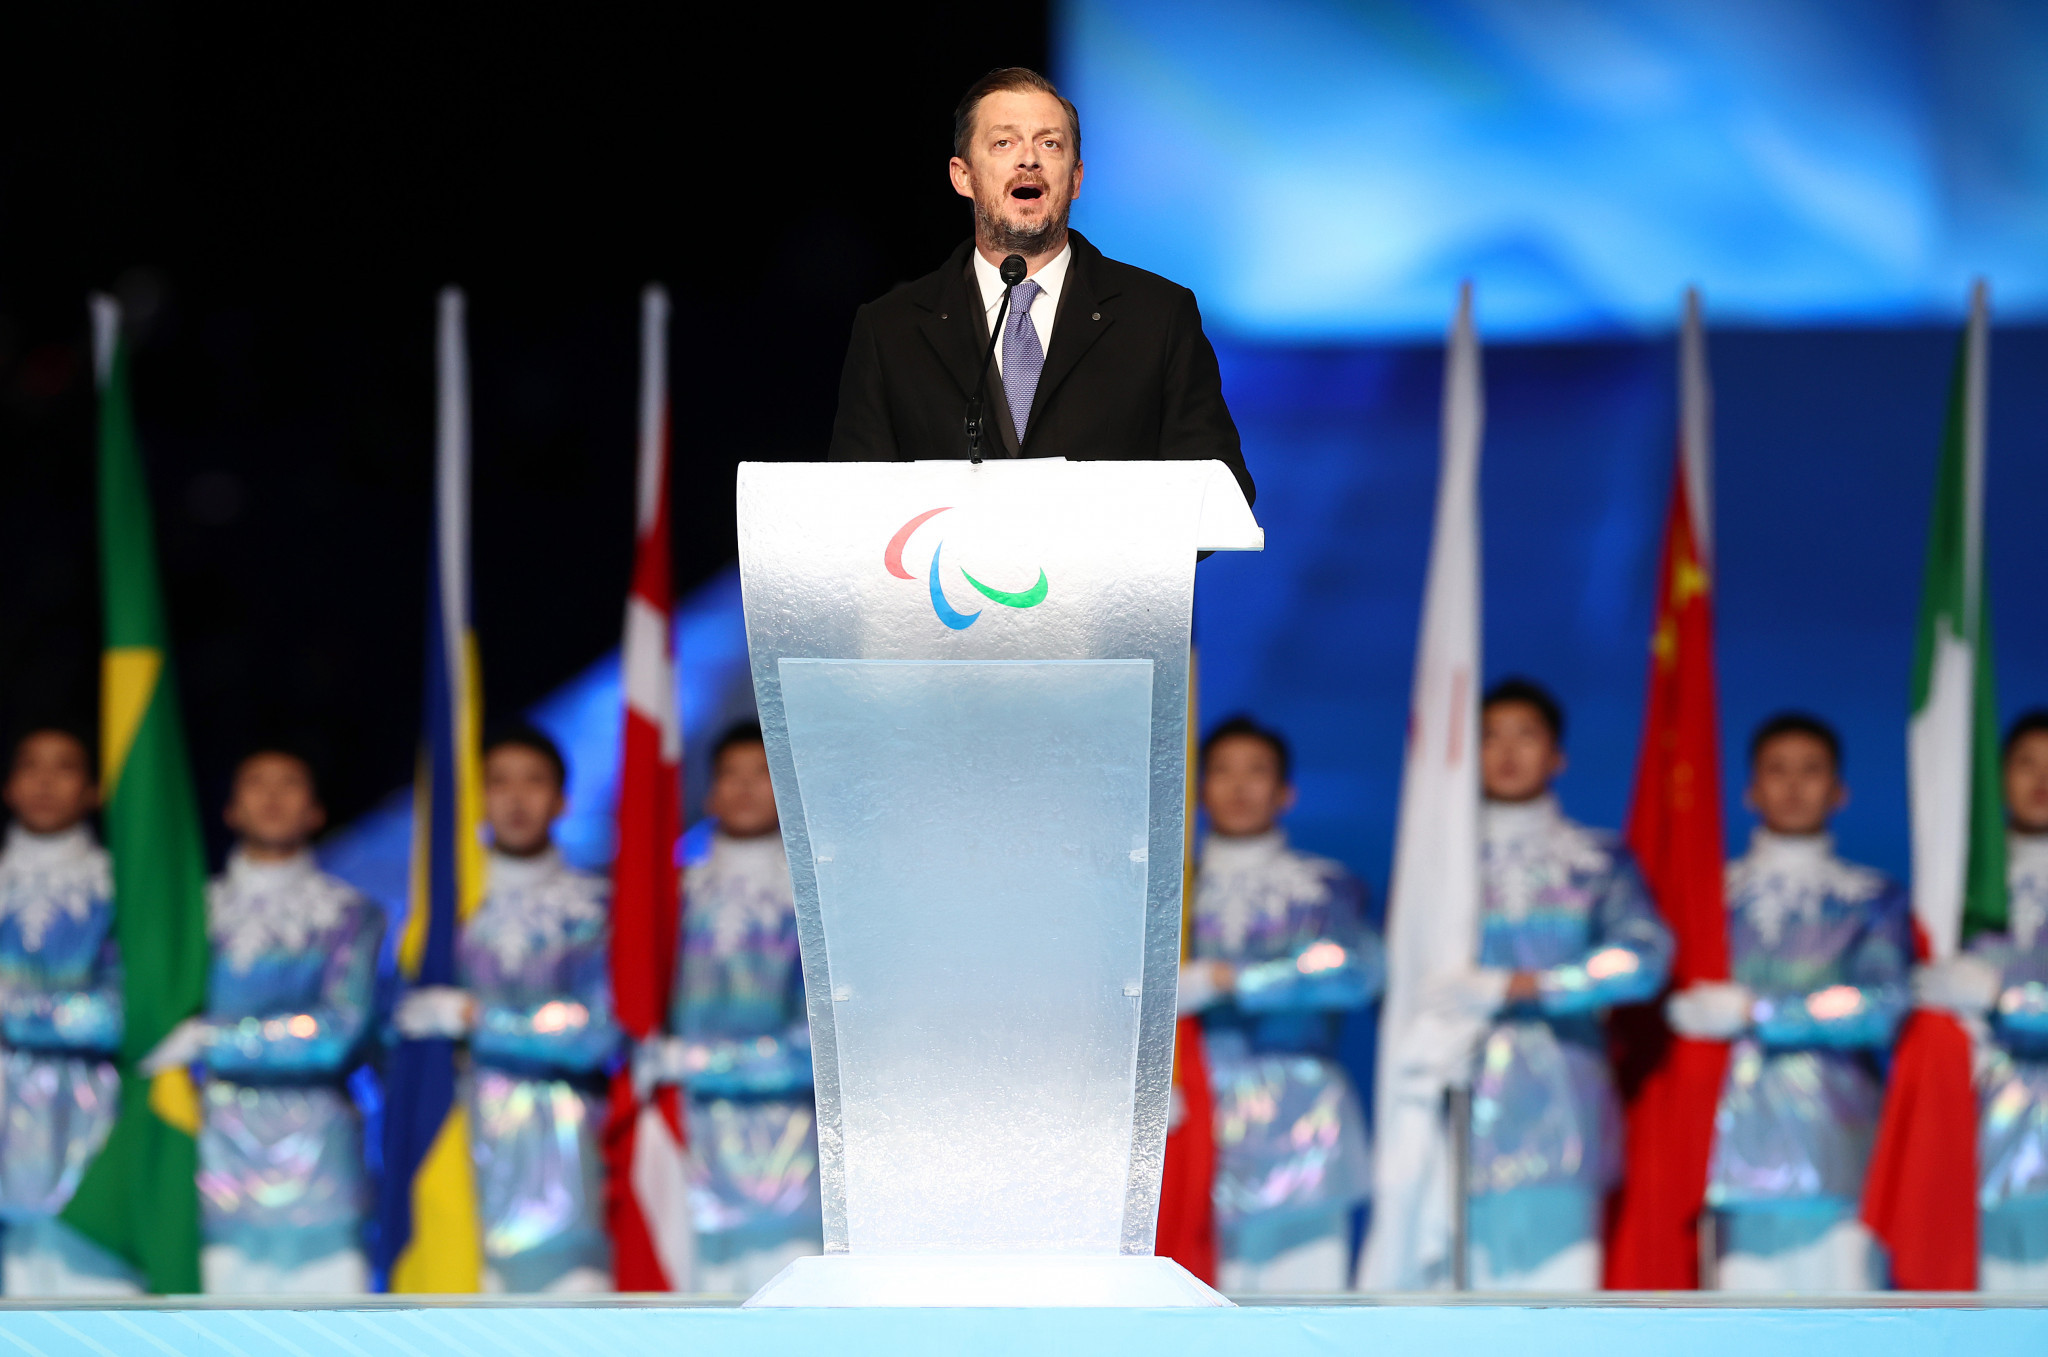 The IPC has received "zero" update, after it asked CCTV for "an official response" to reports it failed to translate part of Andrew Parsons' Opening Ceremony speech which called for peace ©Getty Images